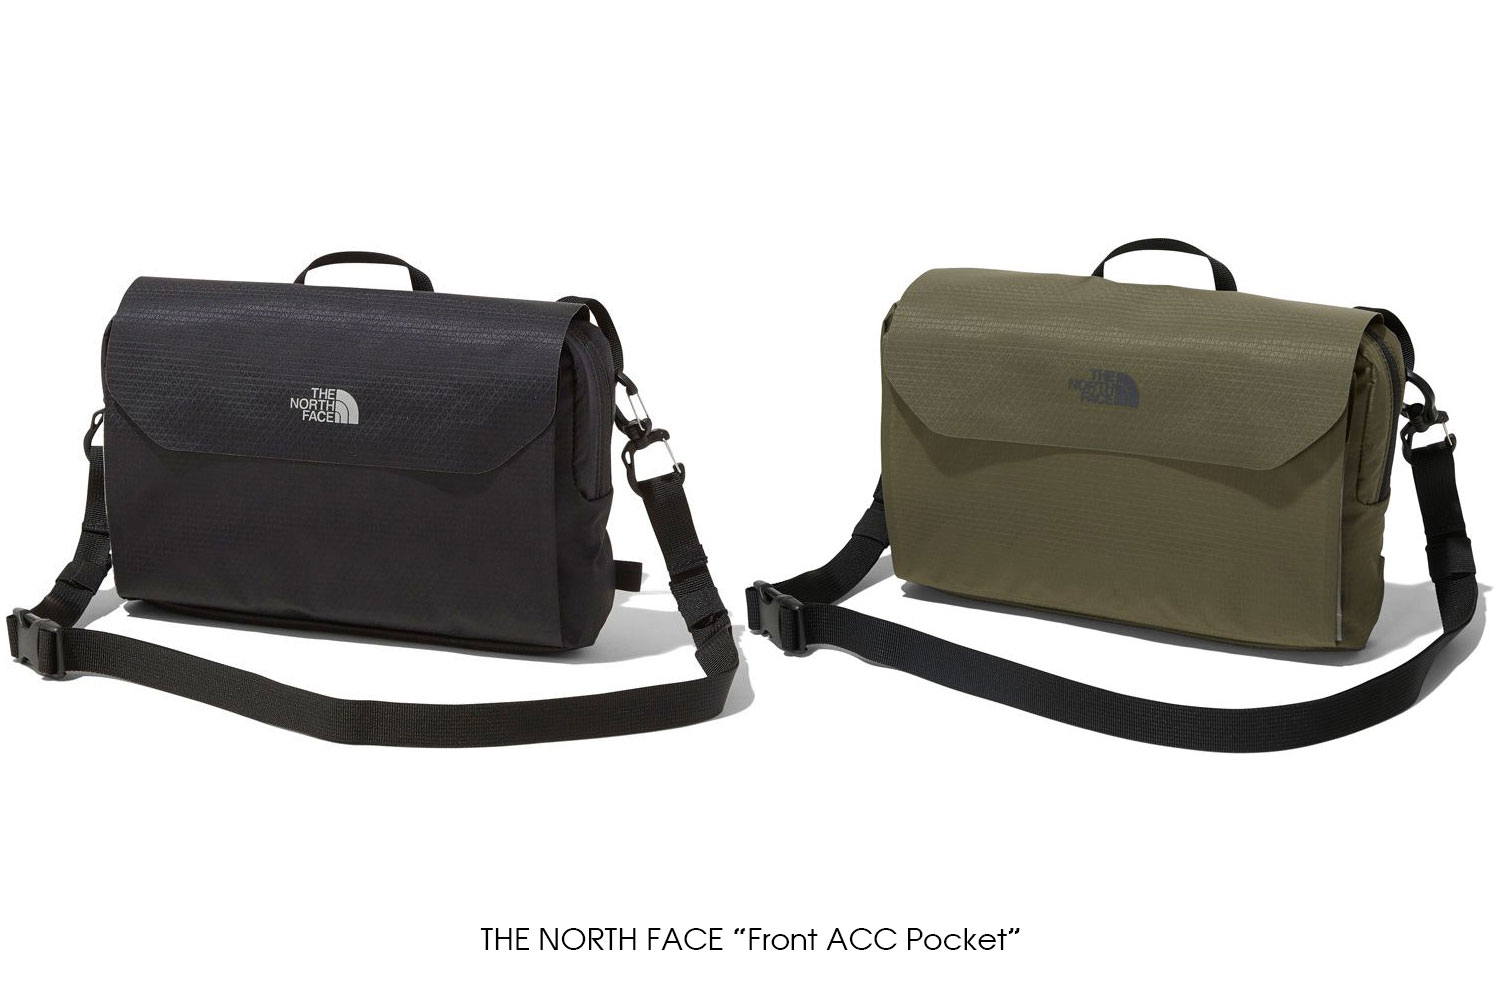 THE NORTH FACE "Front ACC Pocket"